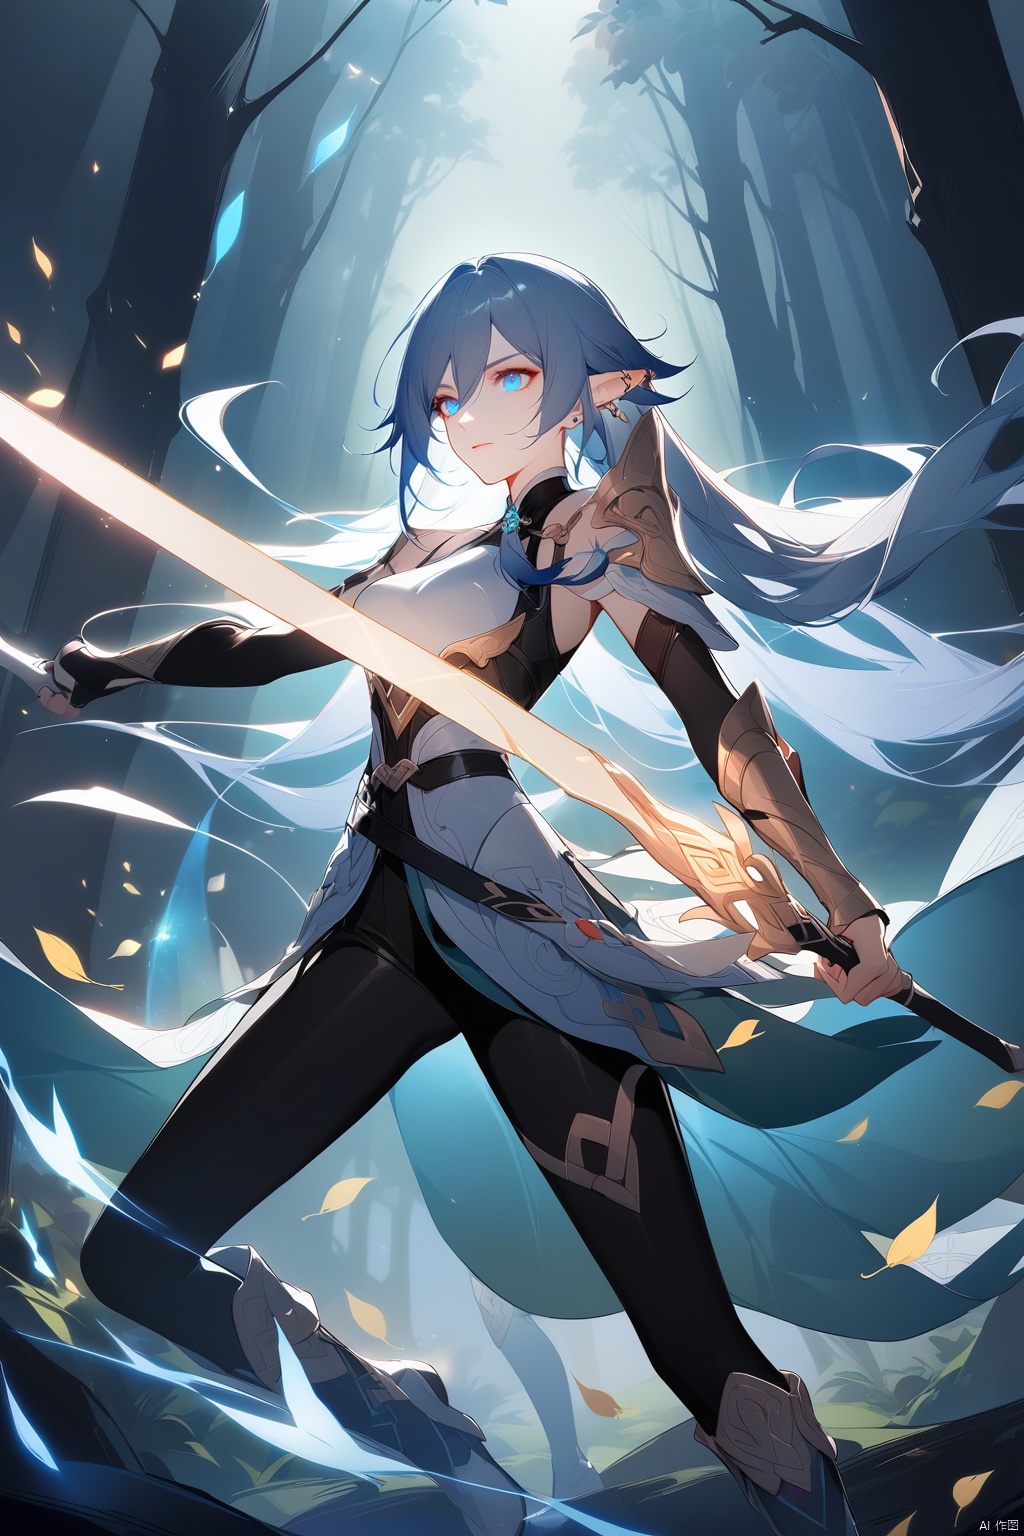  [[fu hua (phoenix)(honkai impact 3rd)]],nai3,1girl,solo,blue eyes
{artist:ask(askzy)}, 
1elf, female, warrior stance, elegant armor, flowing silver hair, piercing blue eyes, elven ears, intricate leaf-designed breastplate, wielding a glowing sword, forest environment, moonlight filtering through trees, bow and quiver on back, leather bracers, form-fitting leggings, ethereal glow, detailed boots with Celtic motifs, strong yet feminine facial features, dynamic pose, magical aura